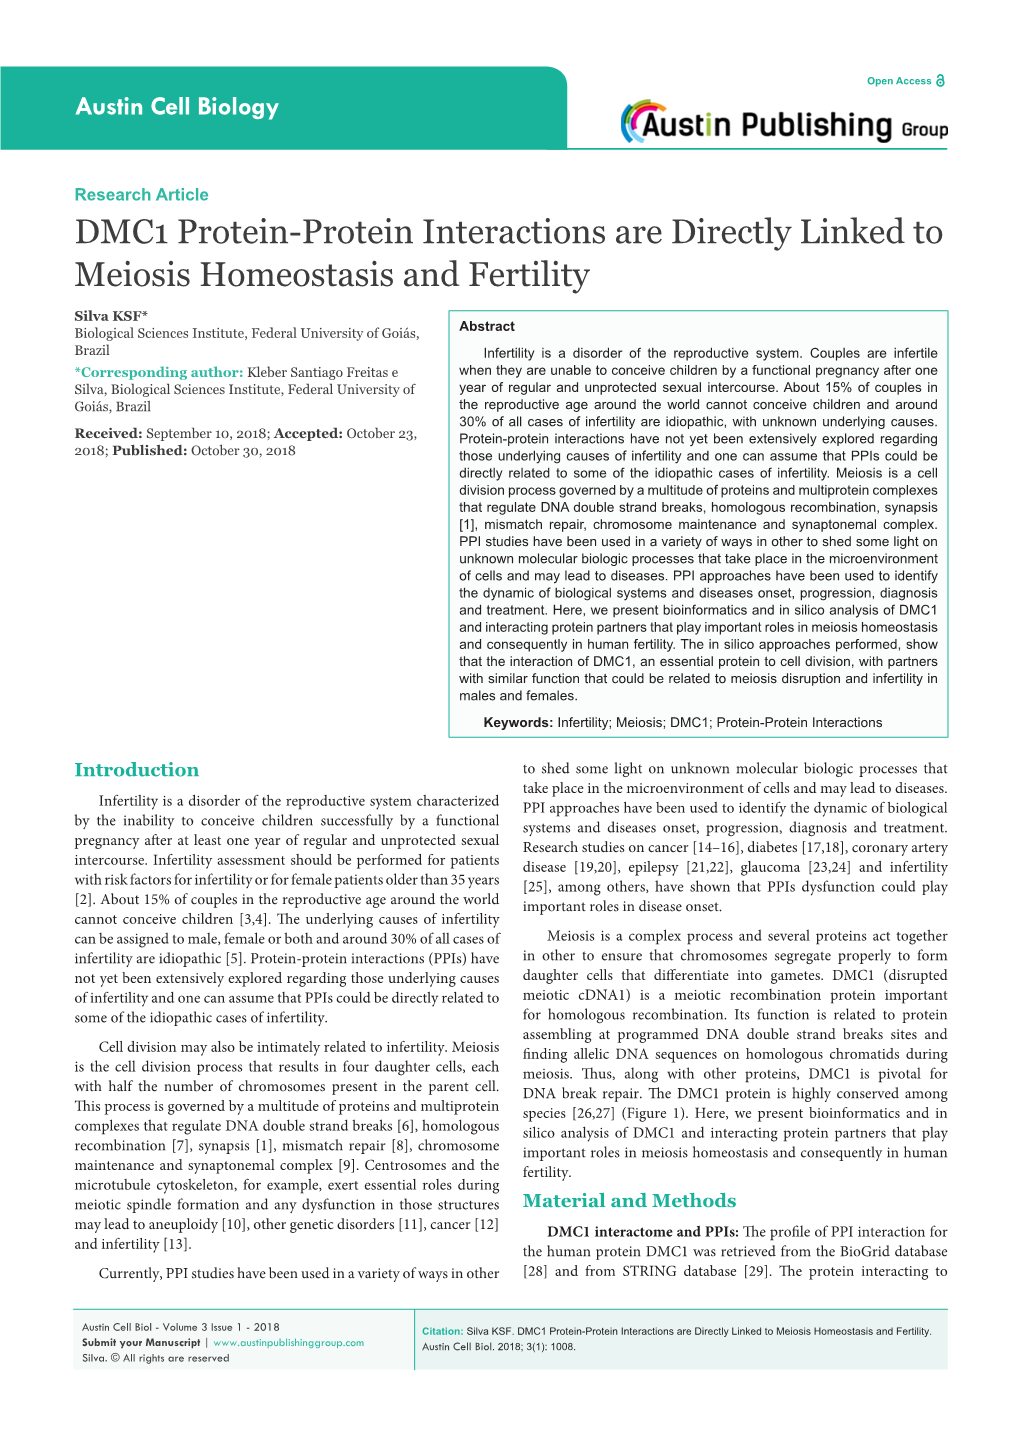 DMC1 Protein-Protein Interactions Are Directly Linked to Meiosis Homeostasis and Fertility